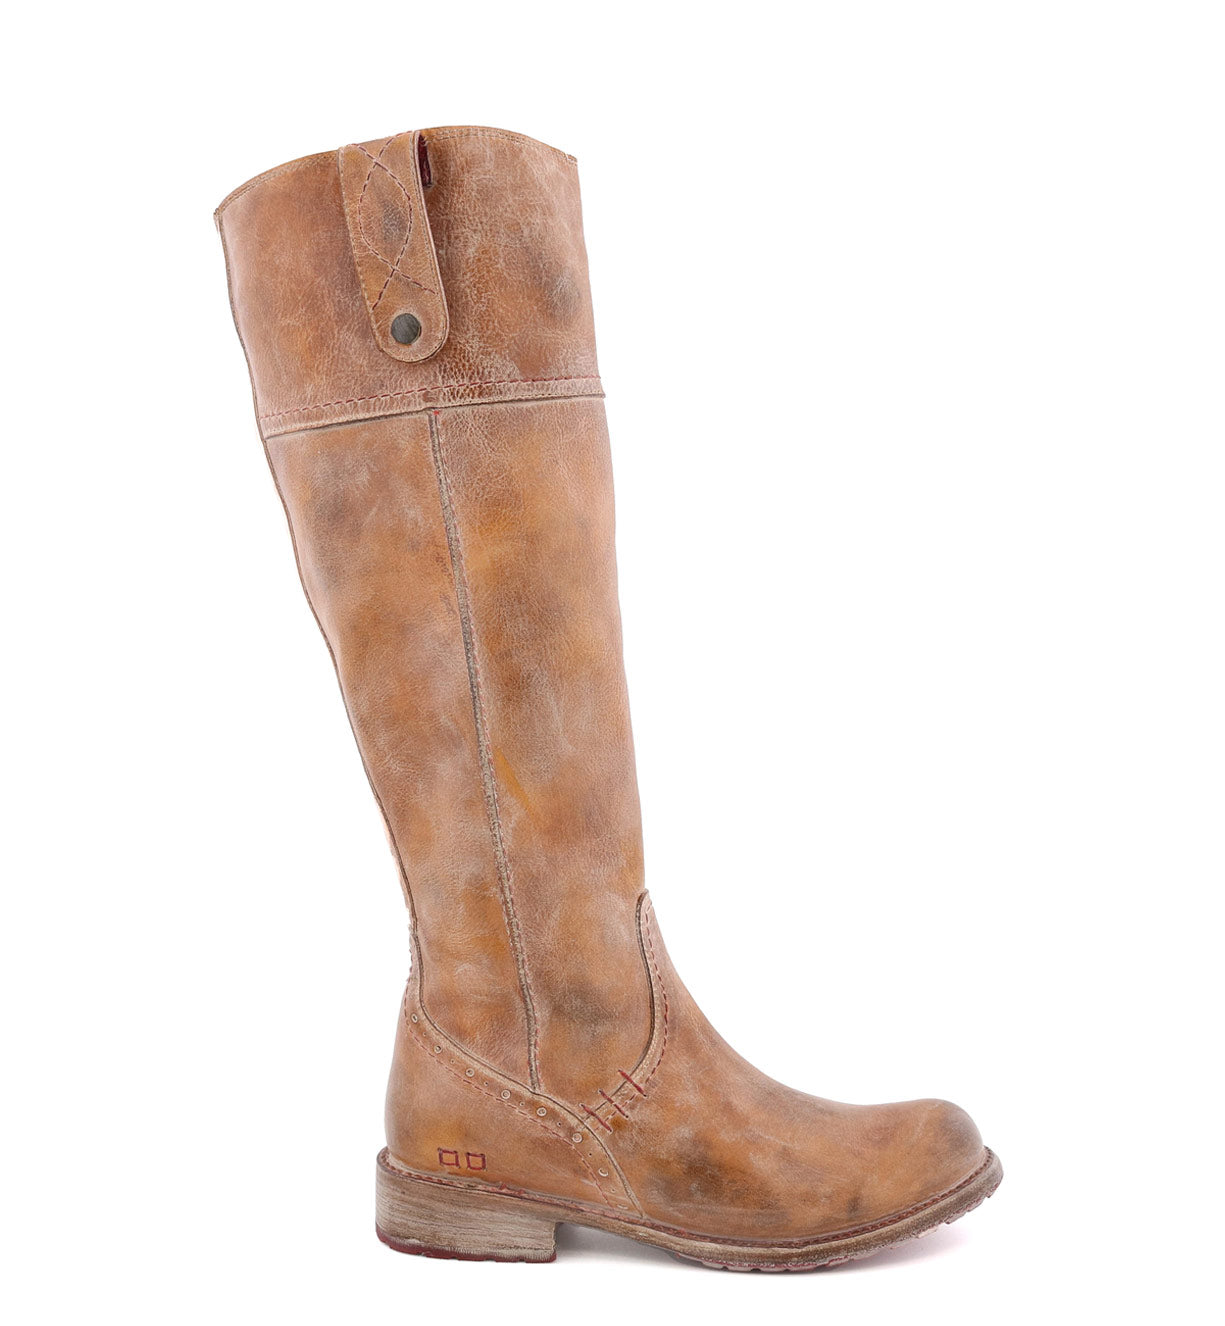 A women's Jacqueline riding boot by Bed Stu